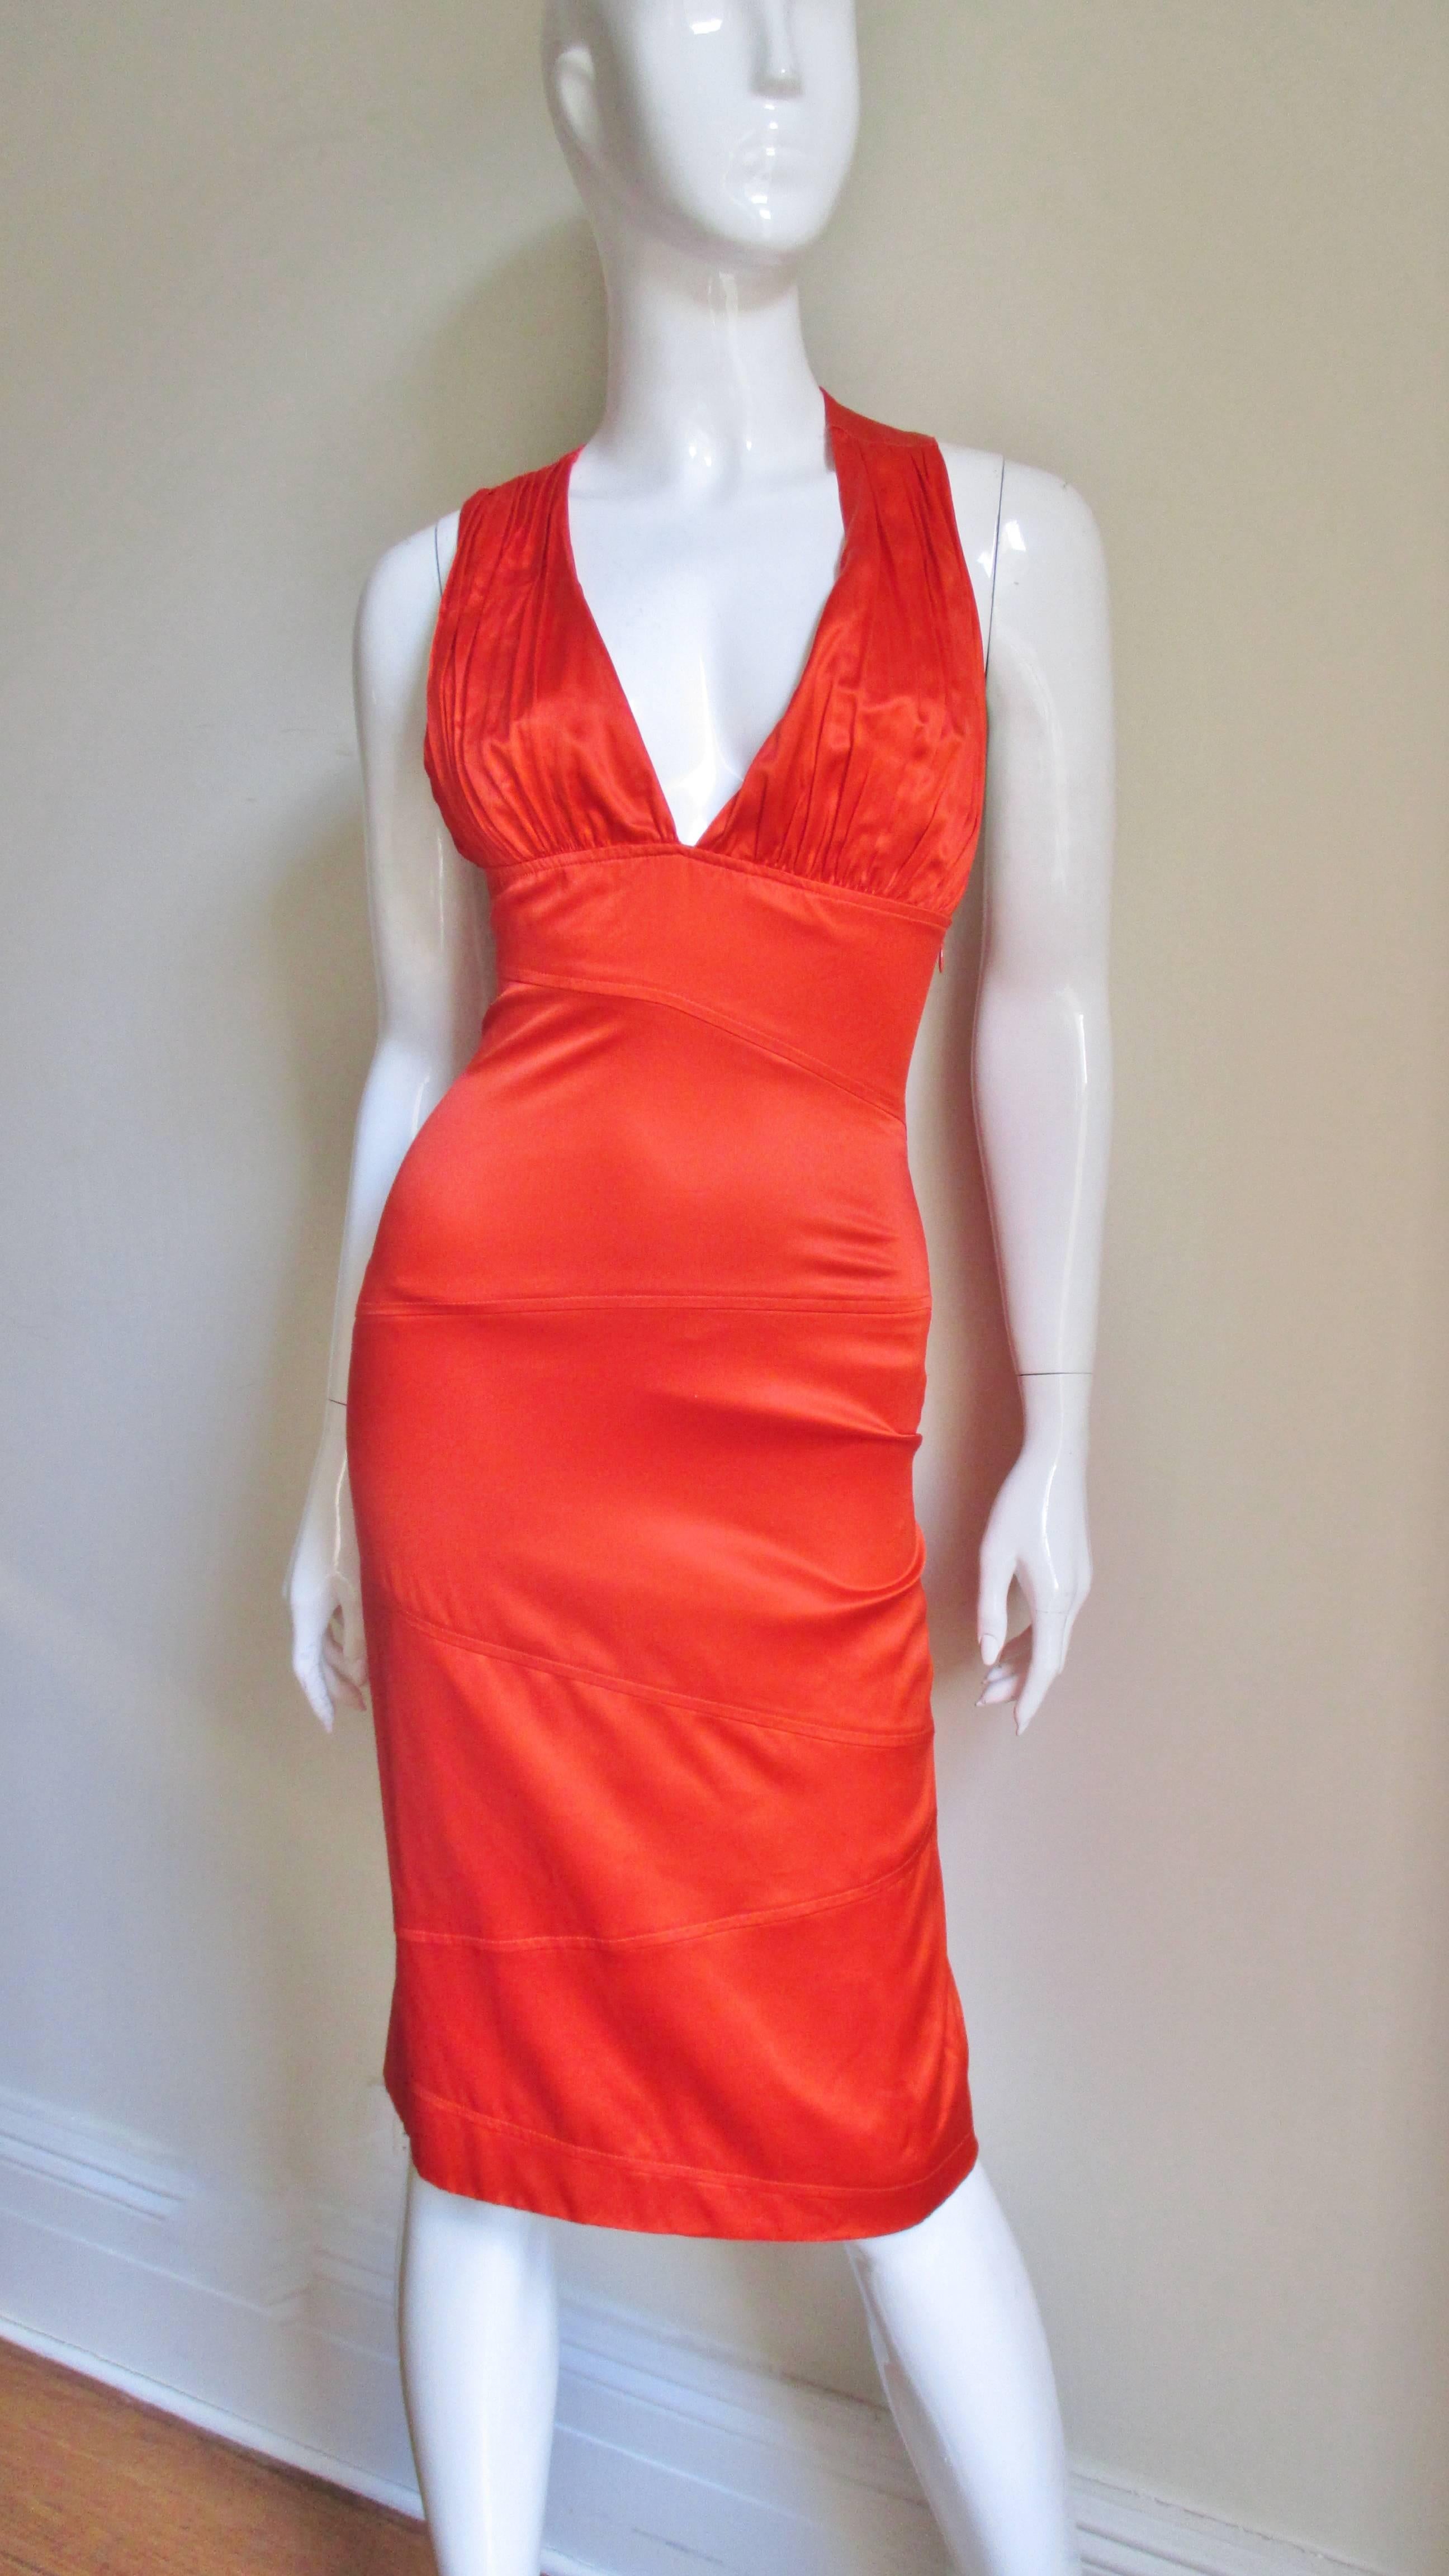 A gorgeous orange fine stretch silk dress from Versace.  It has a plunging front neckline attached to a fitted band around the midriff.  The straight skirt portion is pieced together in horizontal angle seams front and back.  The back is absolutely